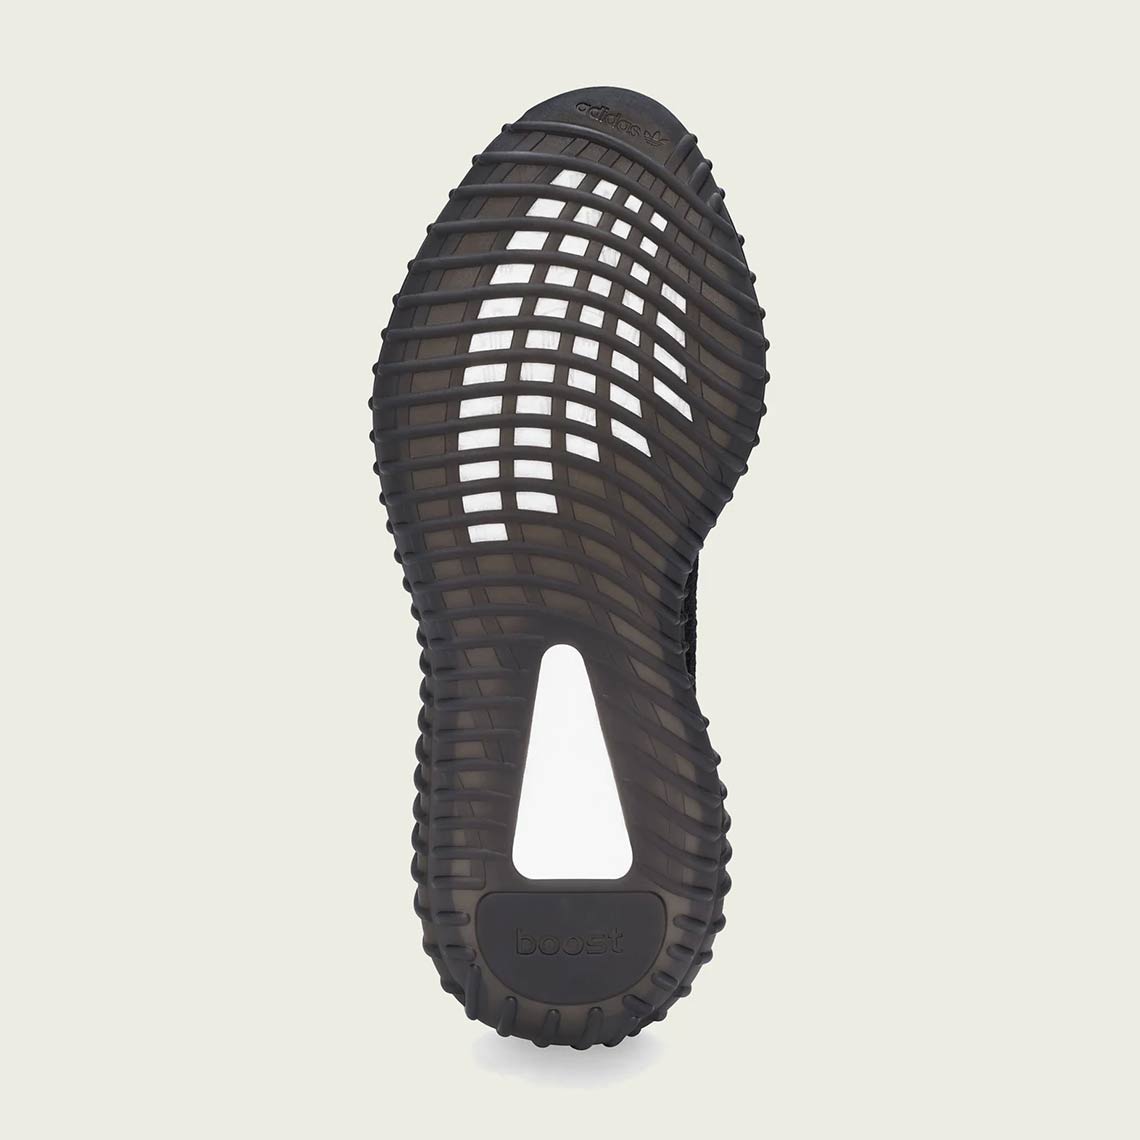 adidas Yeezy Boost 350 v2 Bred 2020 Store List | SneakerNews.com